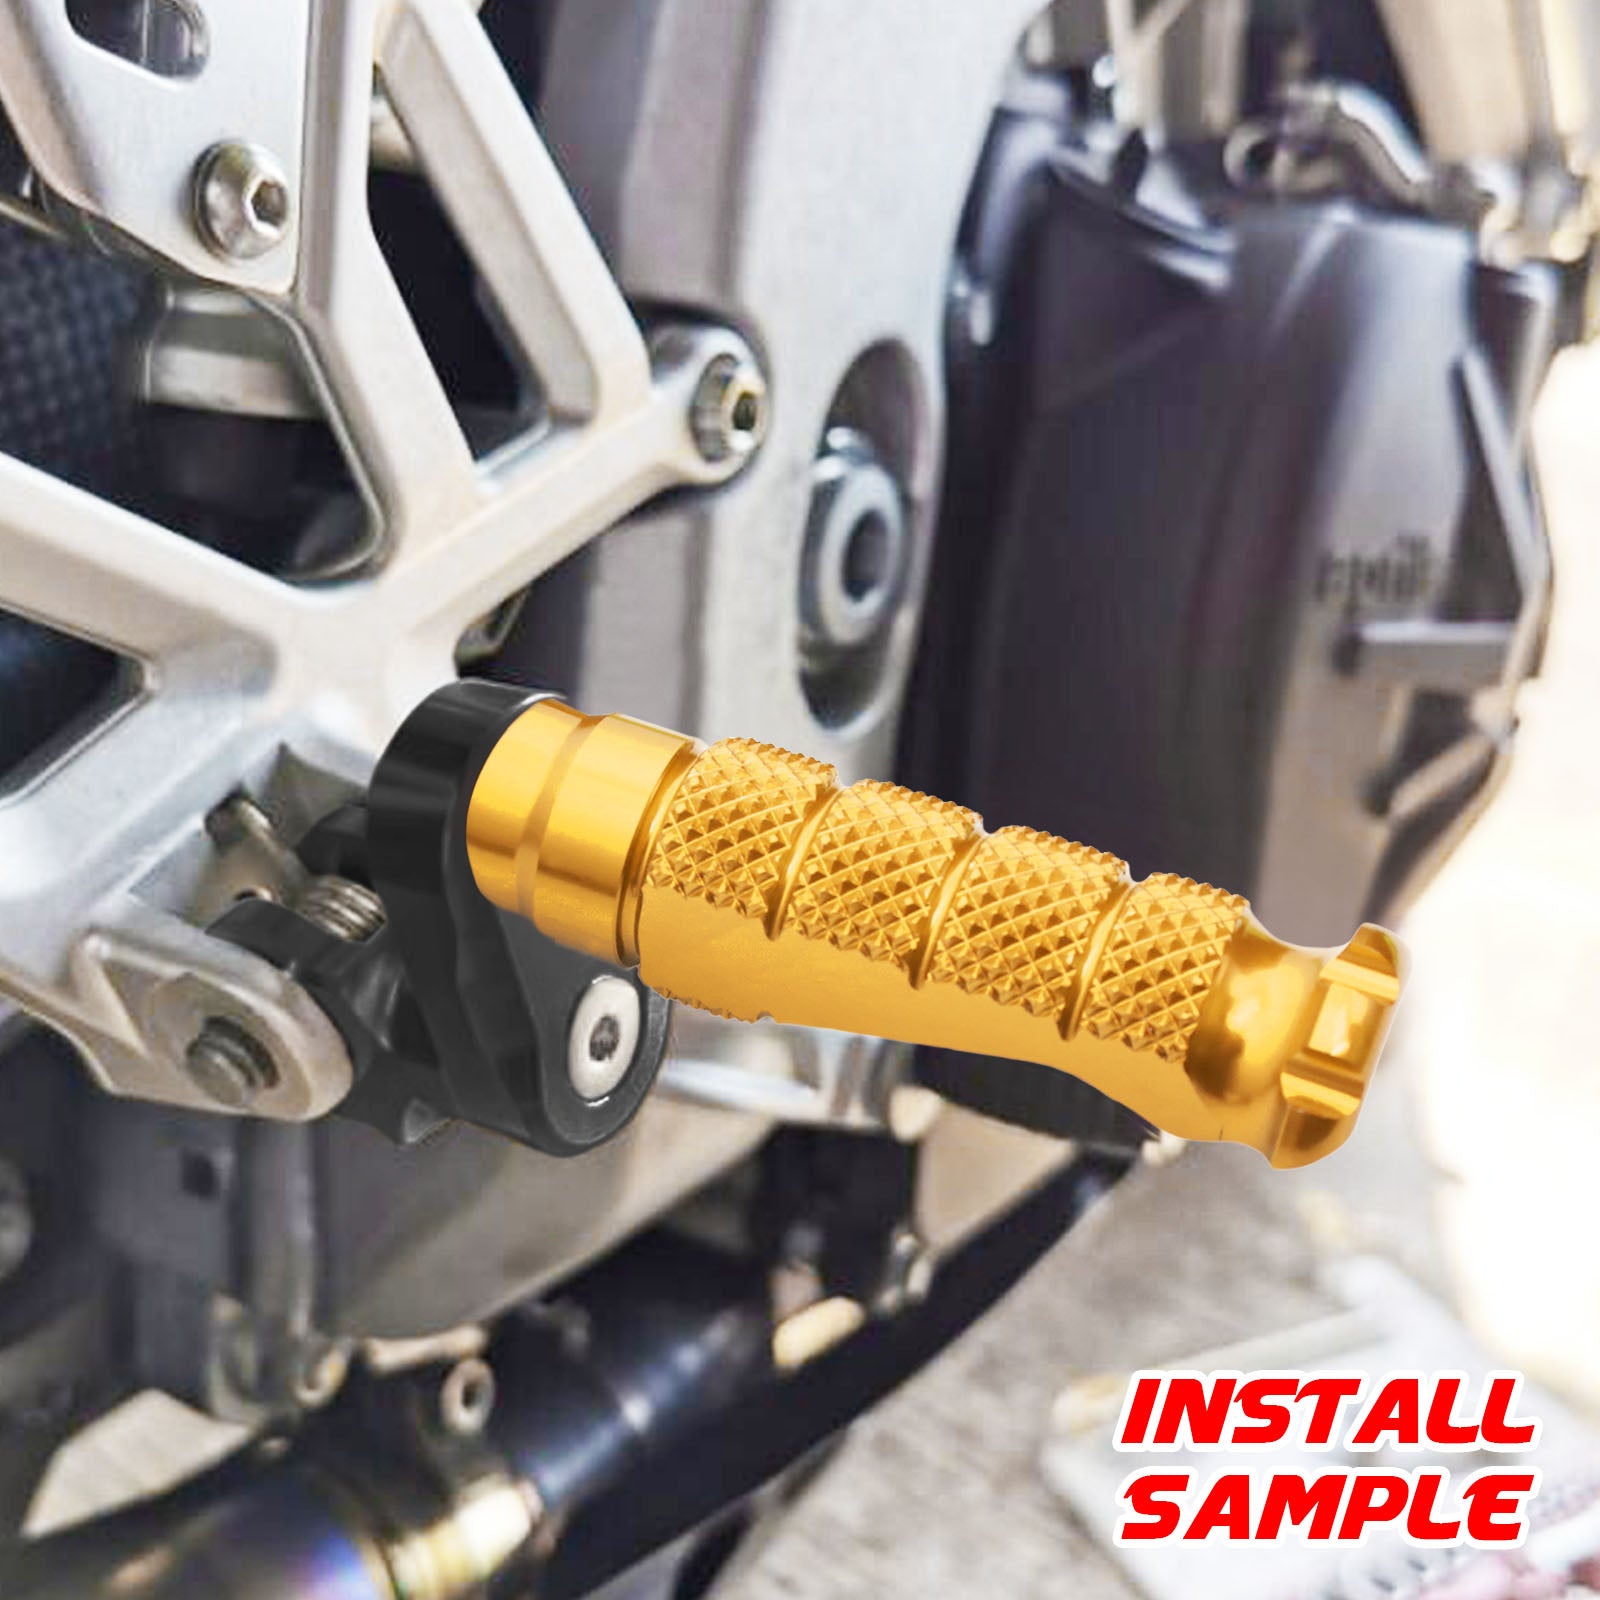 Fits Triumph Speed Four Speed Triple 25mm Adjustable Rear R-FIGHT Gold Foot Pegs